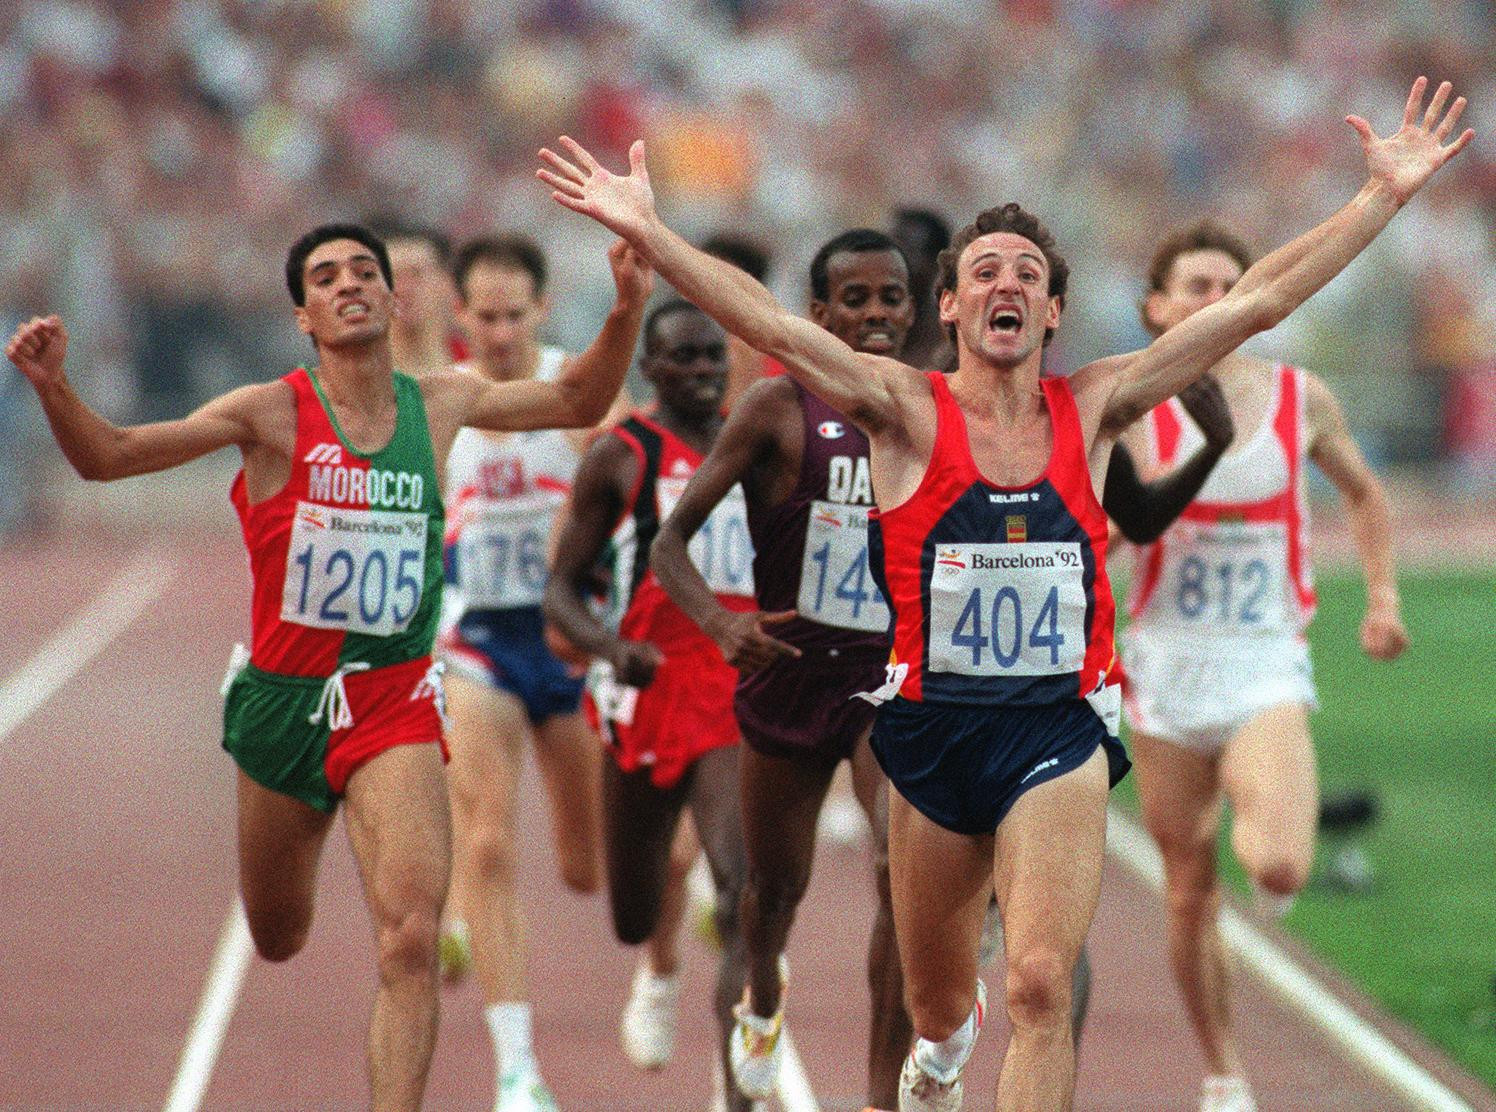 Barcelona 1992 men's 1500m champion Fermín Cacho is also considering legal action against Eufemiano Fuentes ©Getty Images